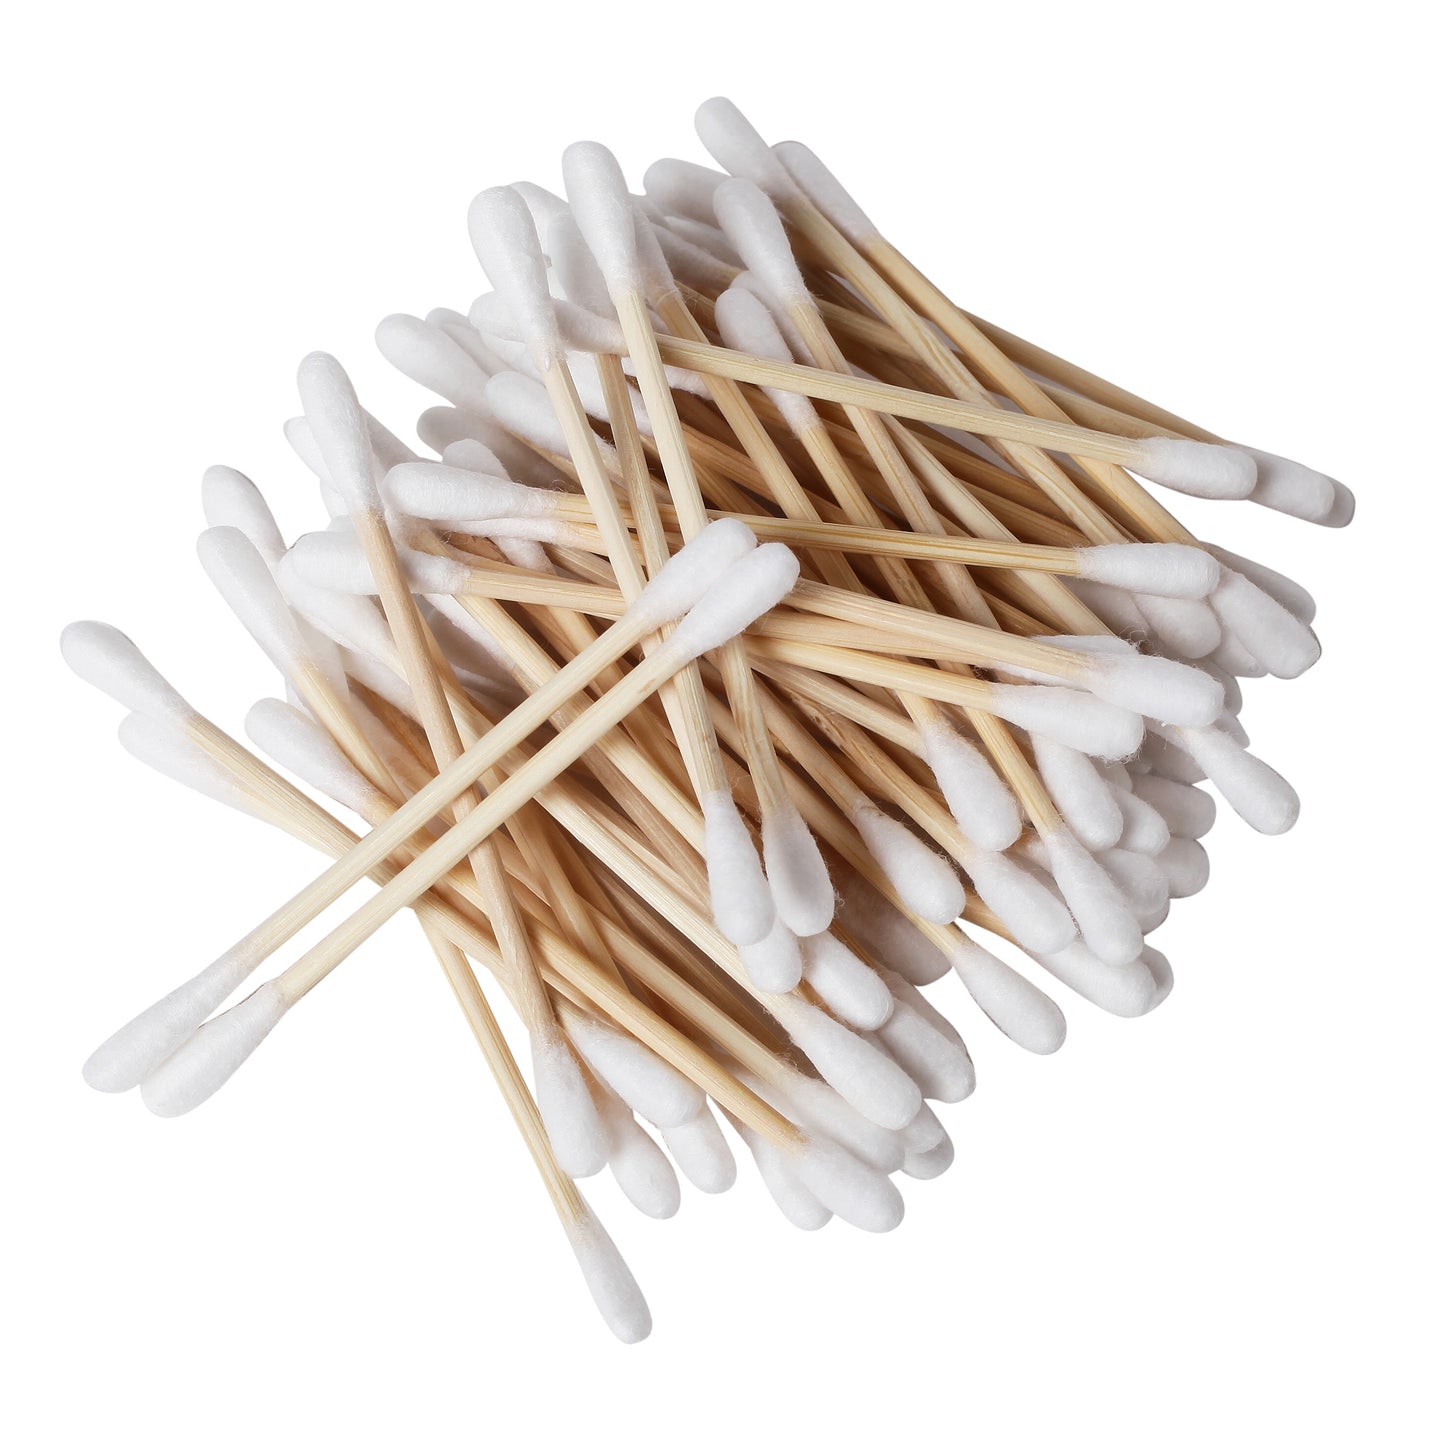 Bamboo Cotton Buds| Cotton Earbuds For Cleaning